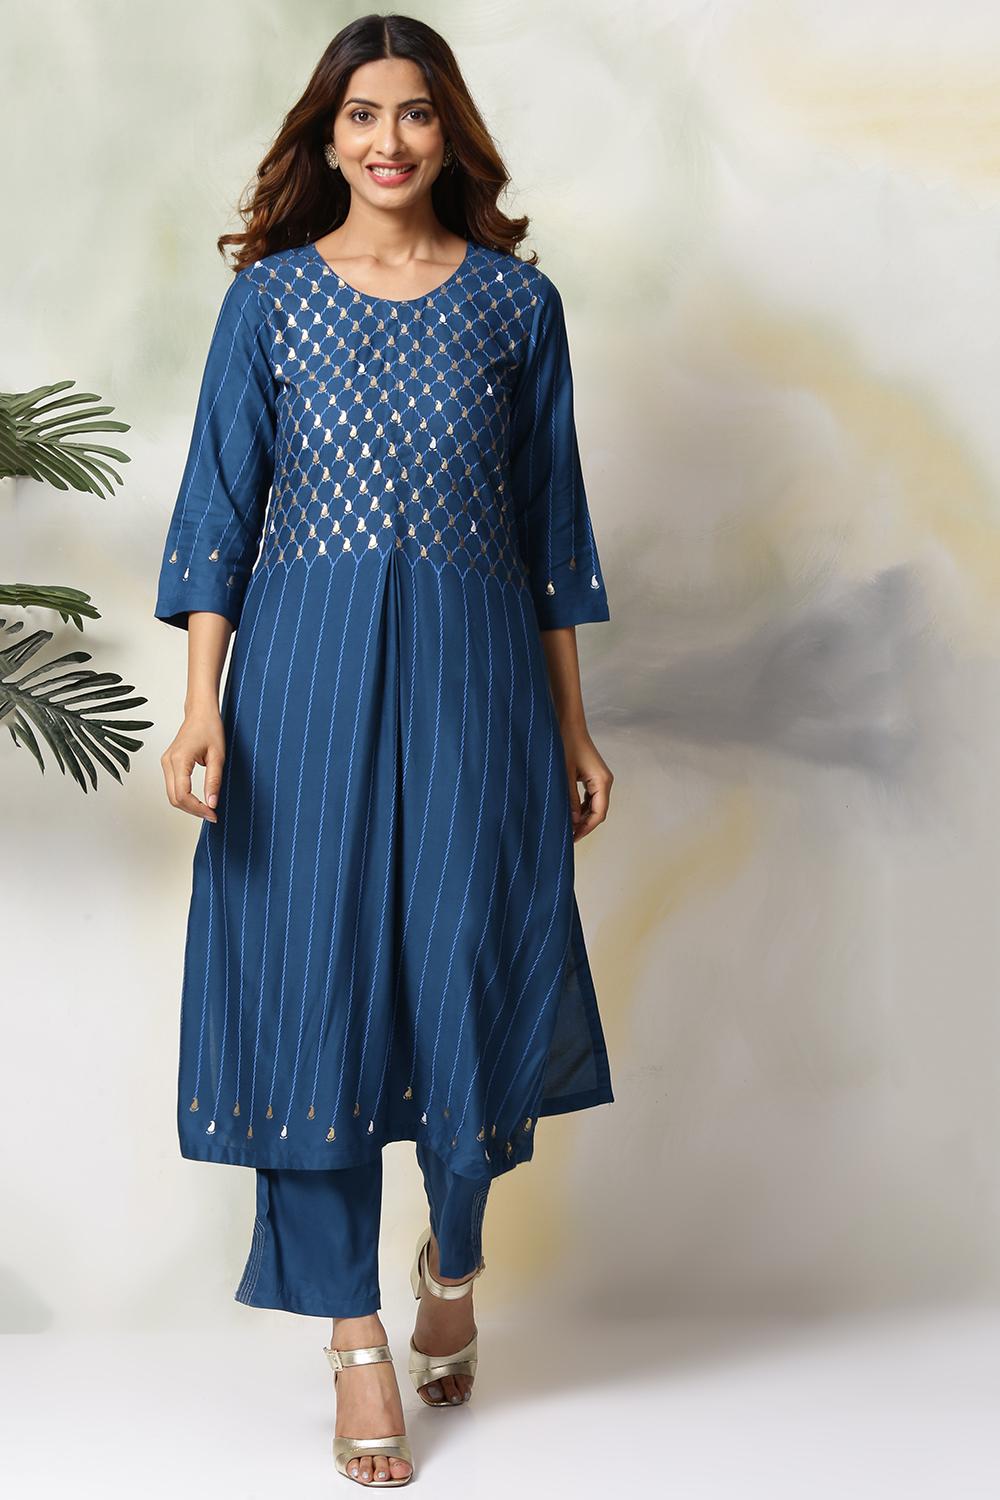 Buy Online Blue Rayaon Straight Suit Set for Women & Girls at Best ...